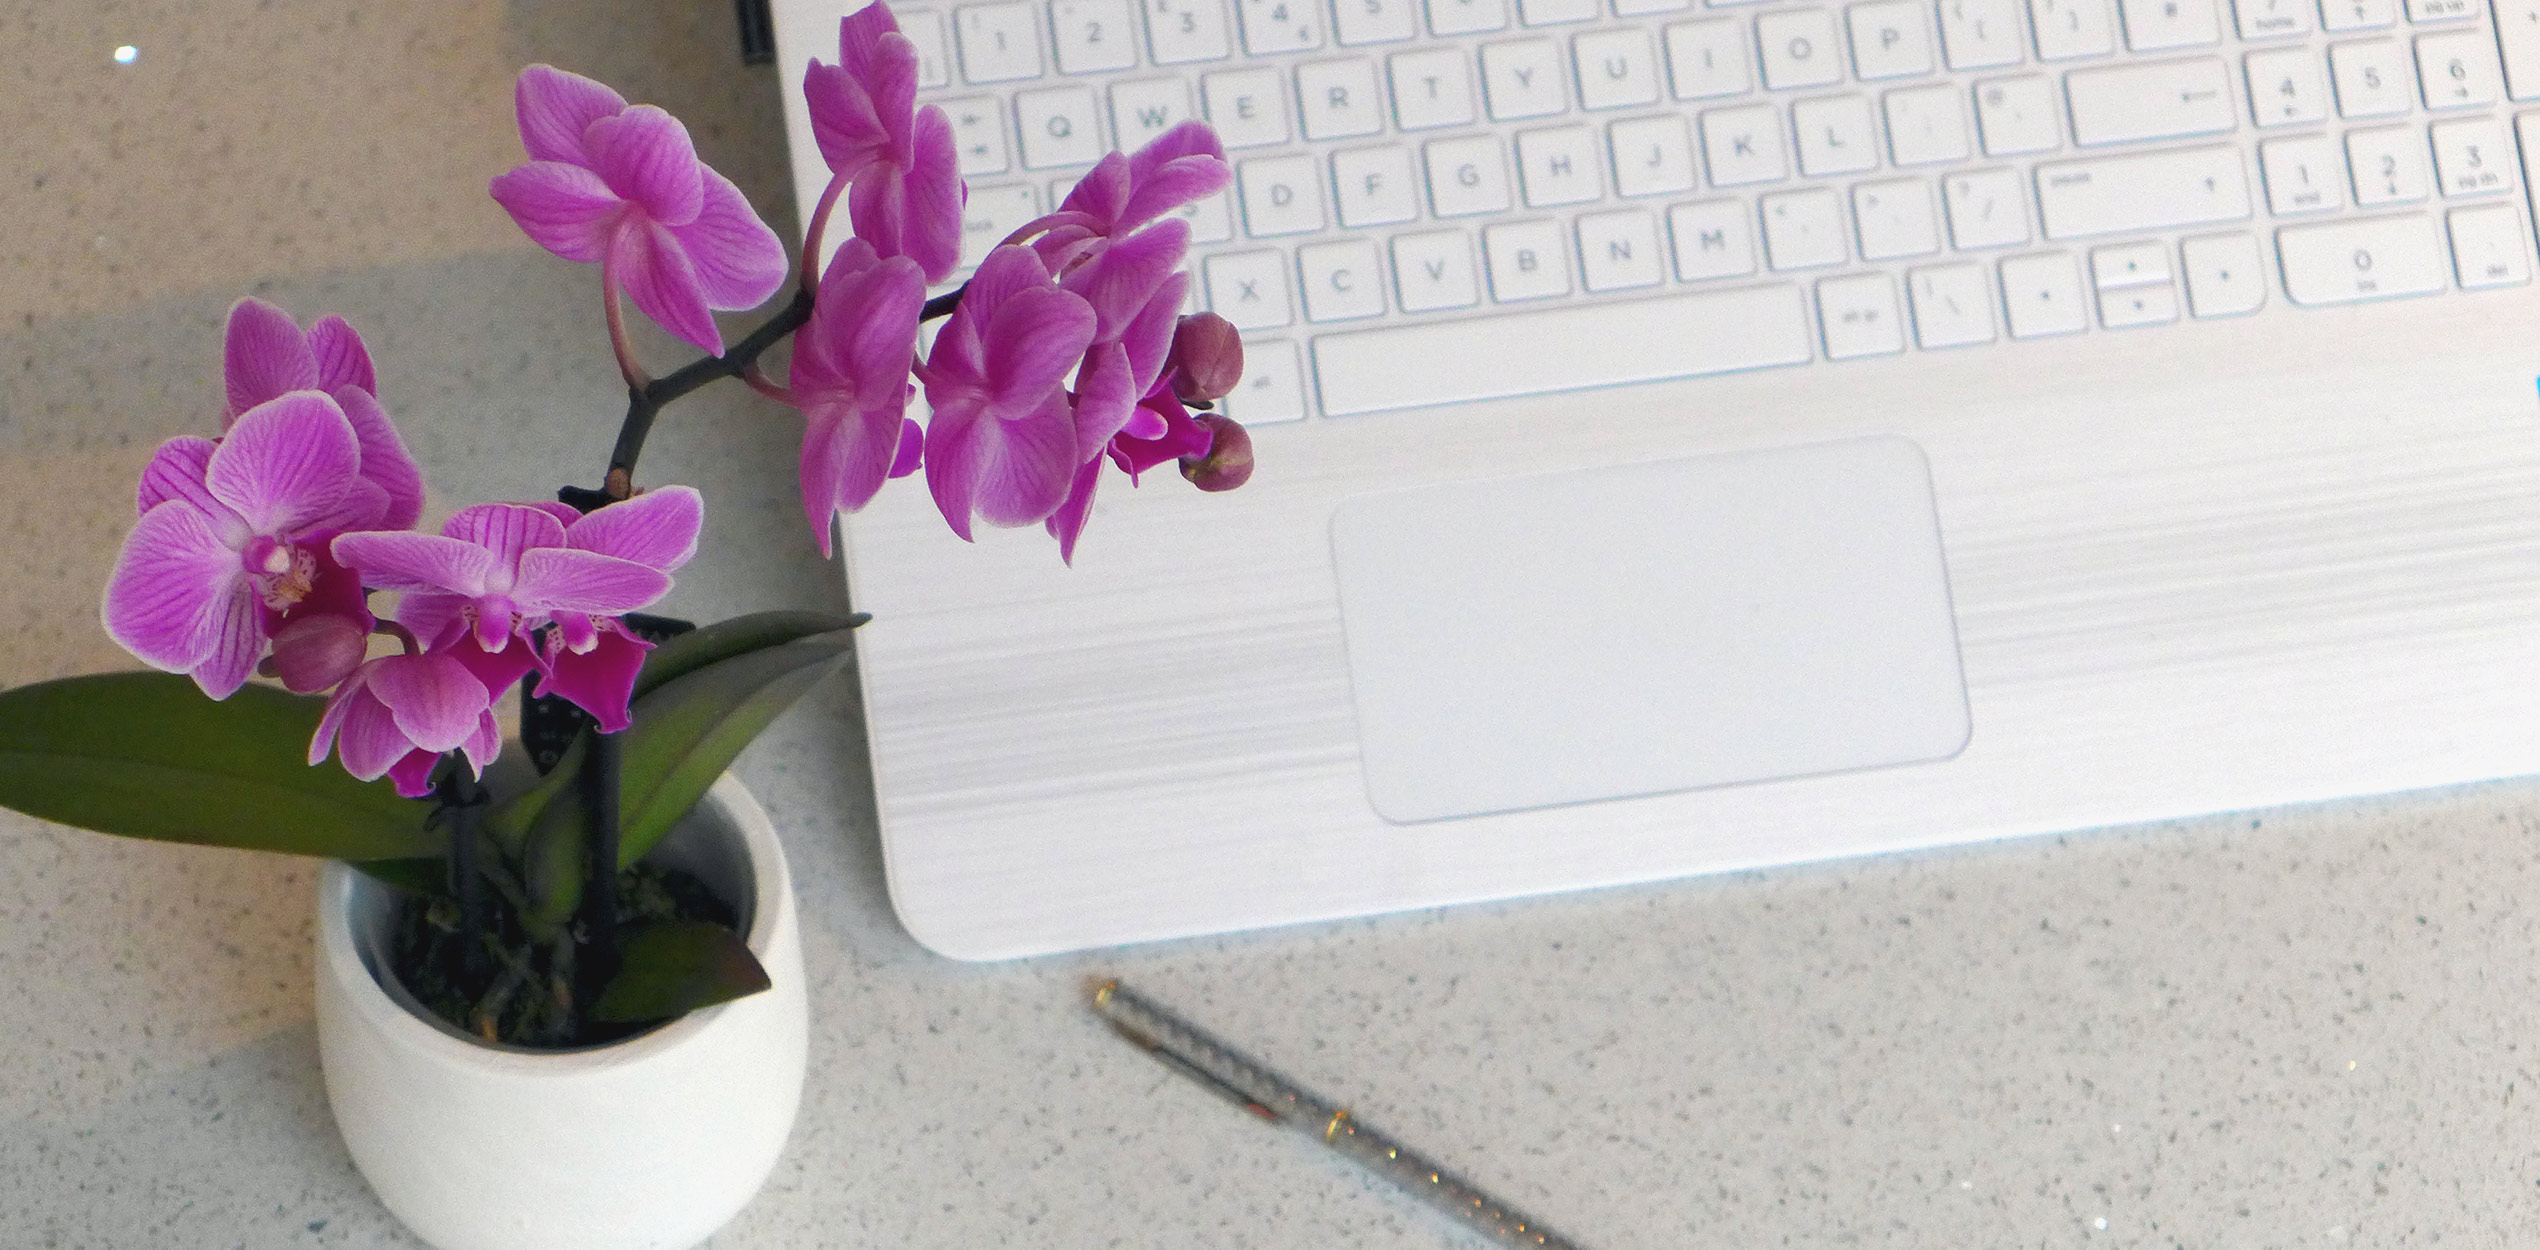 Seven Top Tips For Working From Home